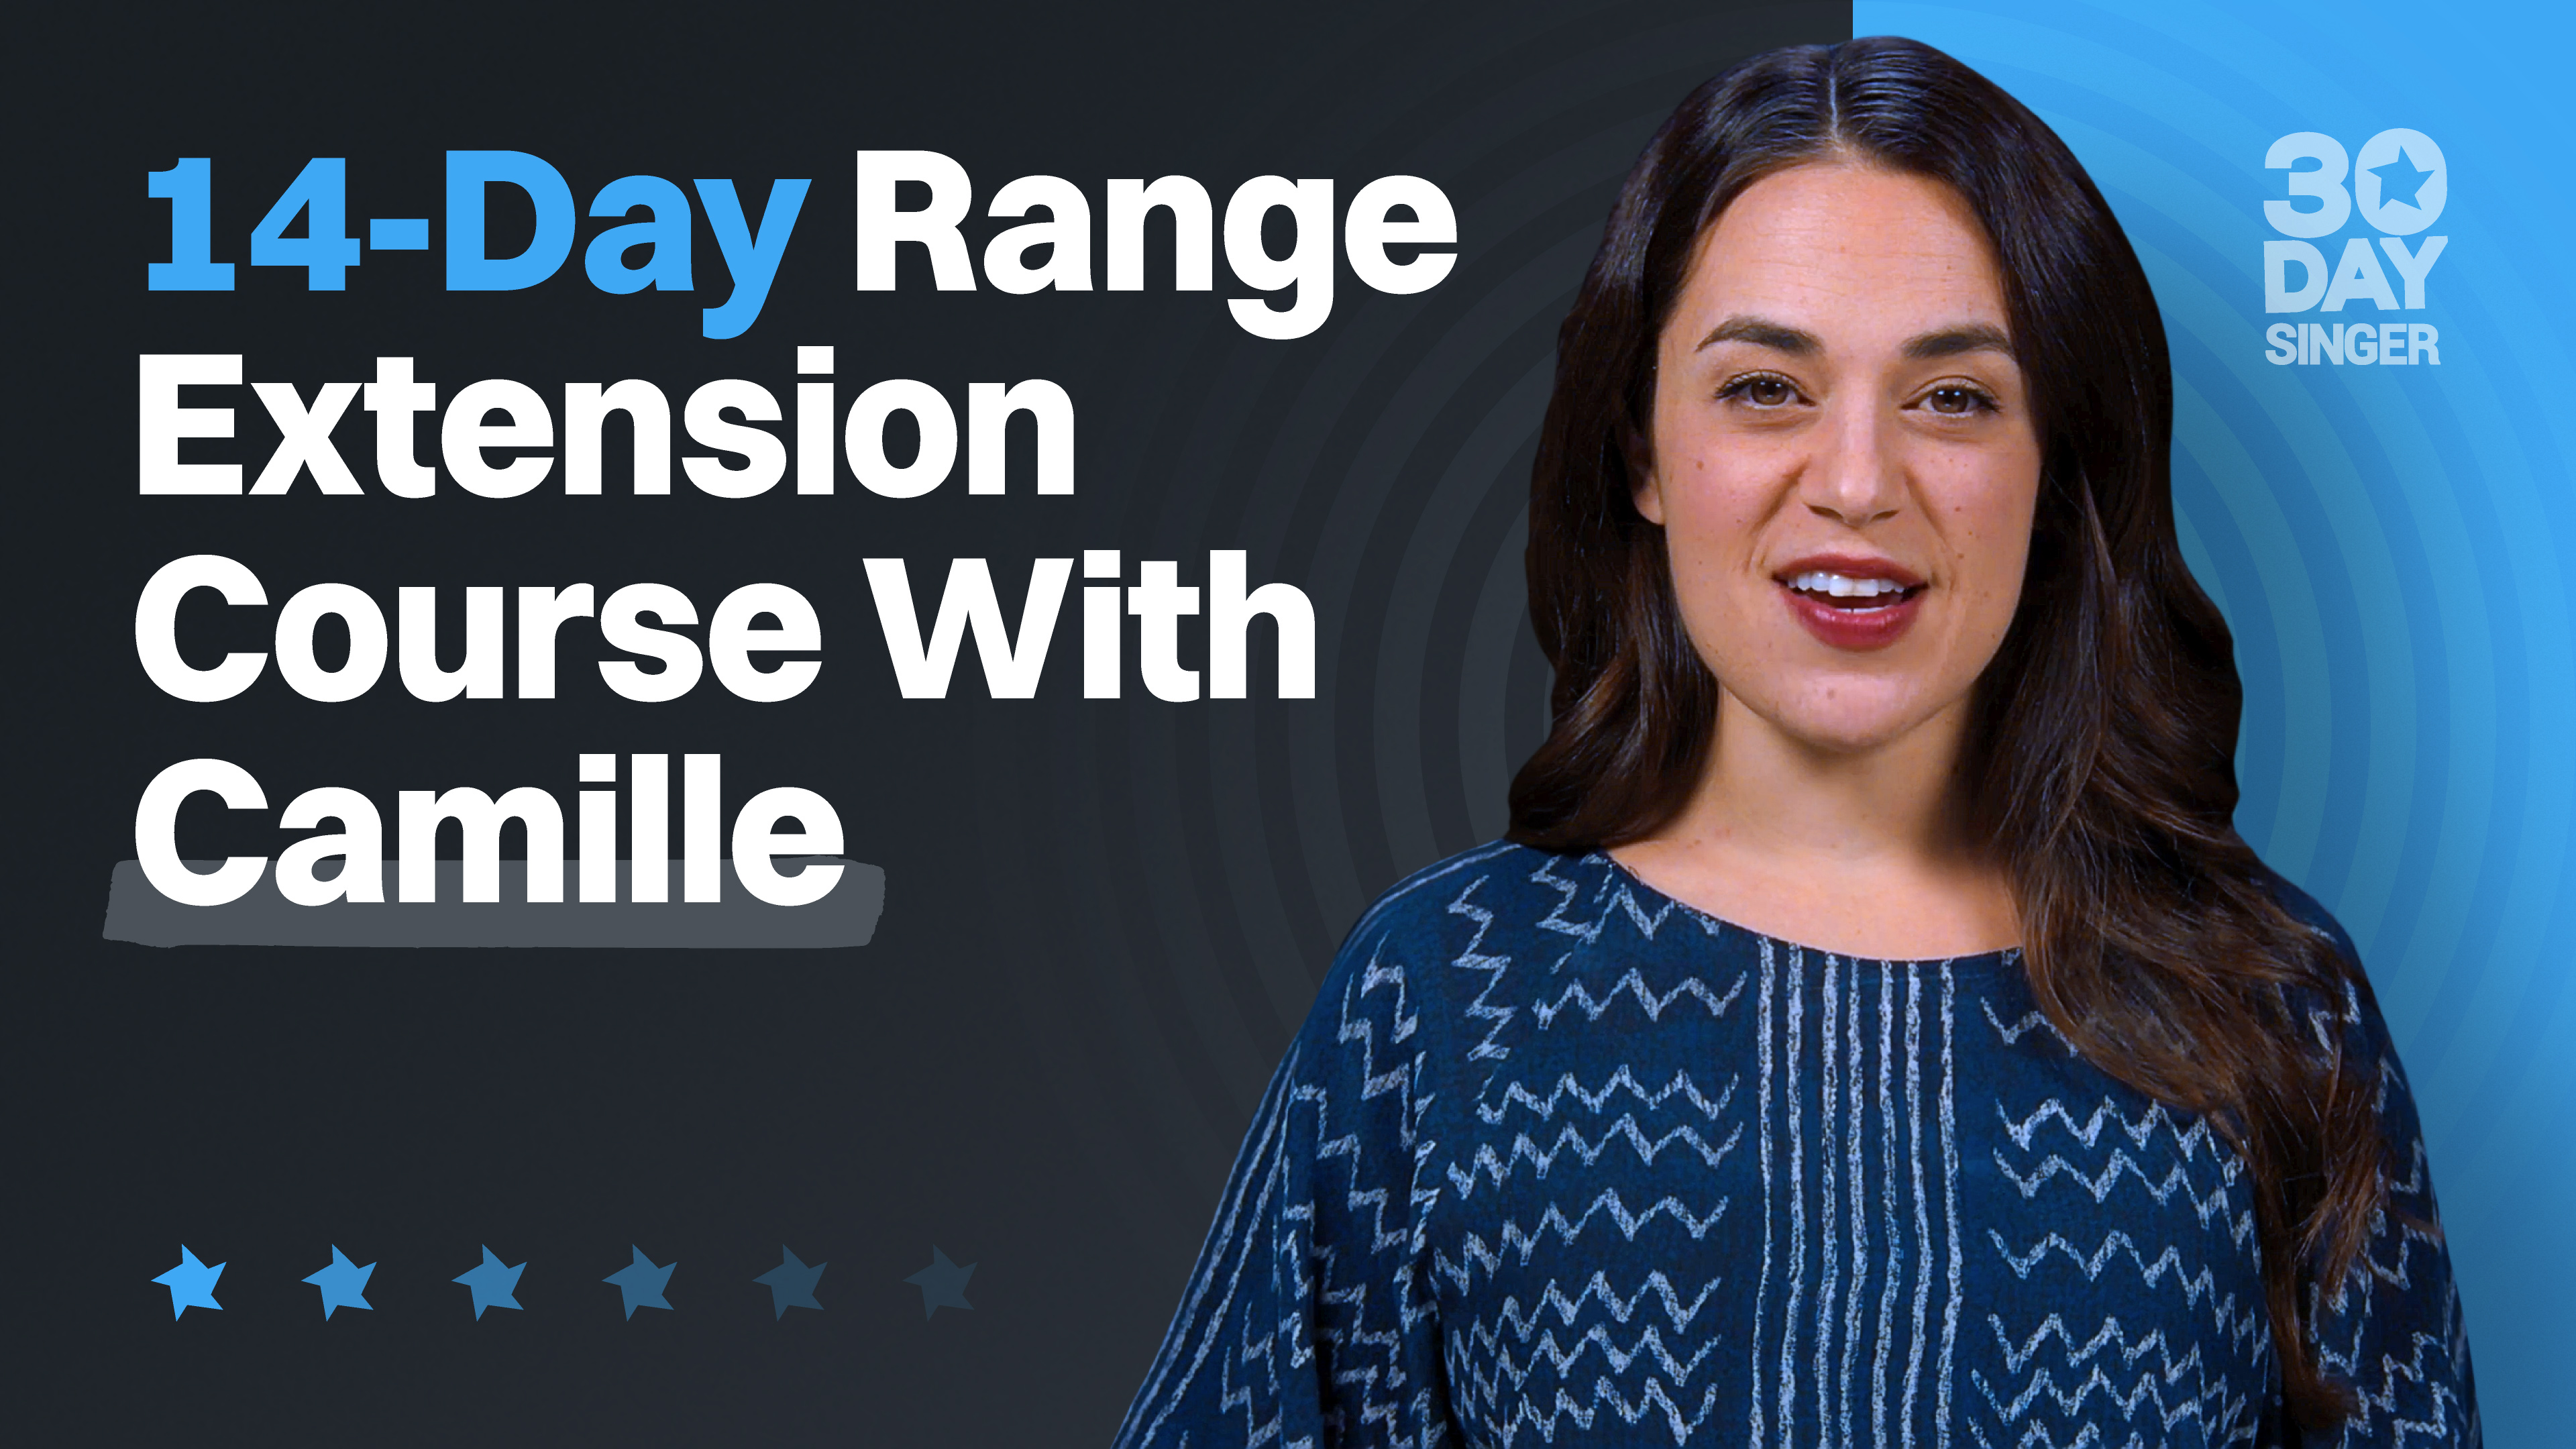 14-Day Range Extension Course With Camille